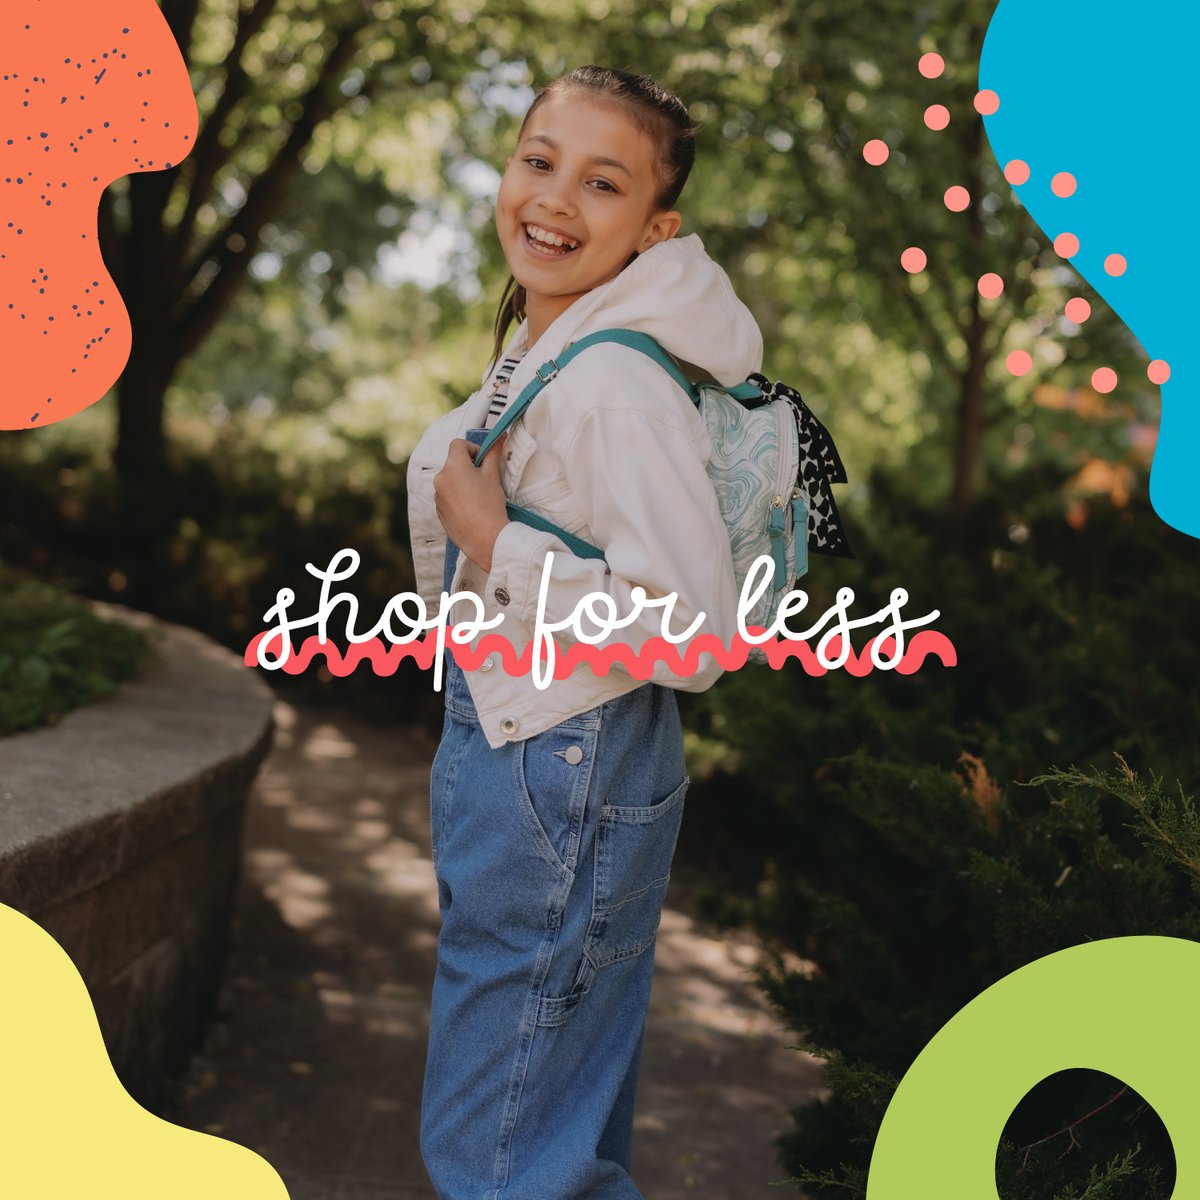 #Find all the back to school apparel needs for your kids priced up to 70% less than regular retail! 
#OnceUponAChild #ResaleRetail #ShopForLess #BackToSchool